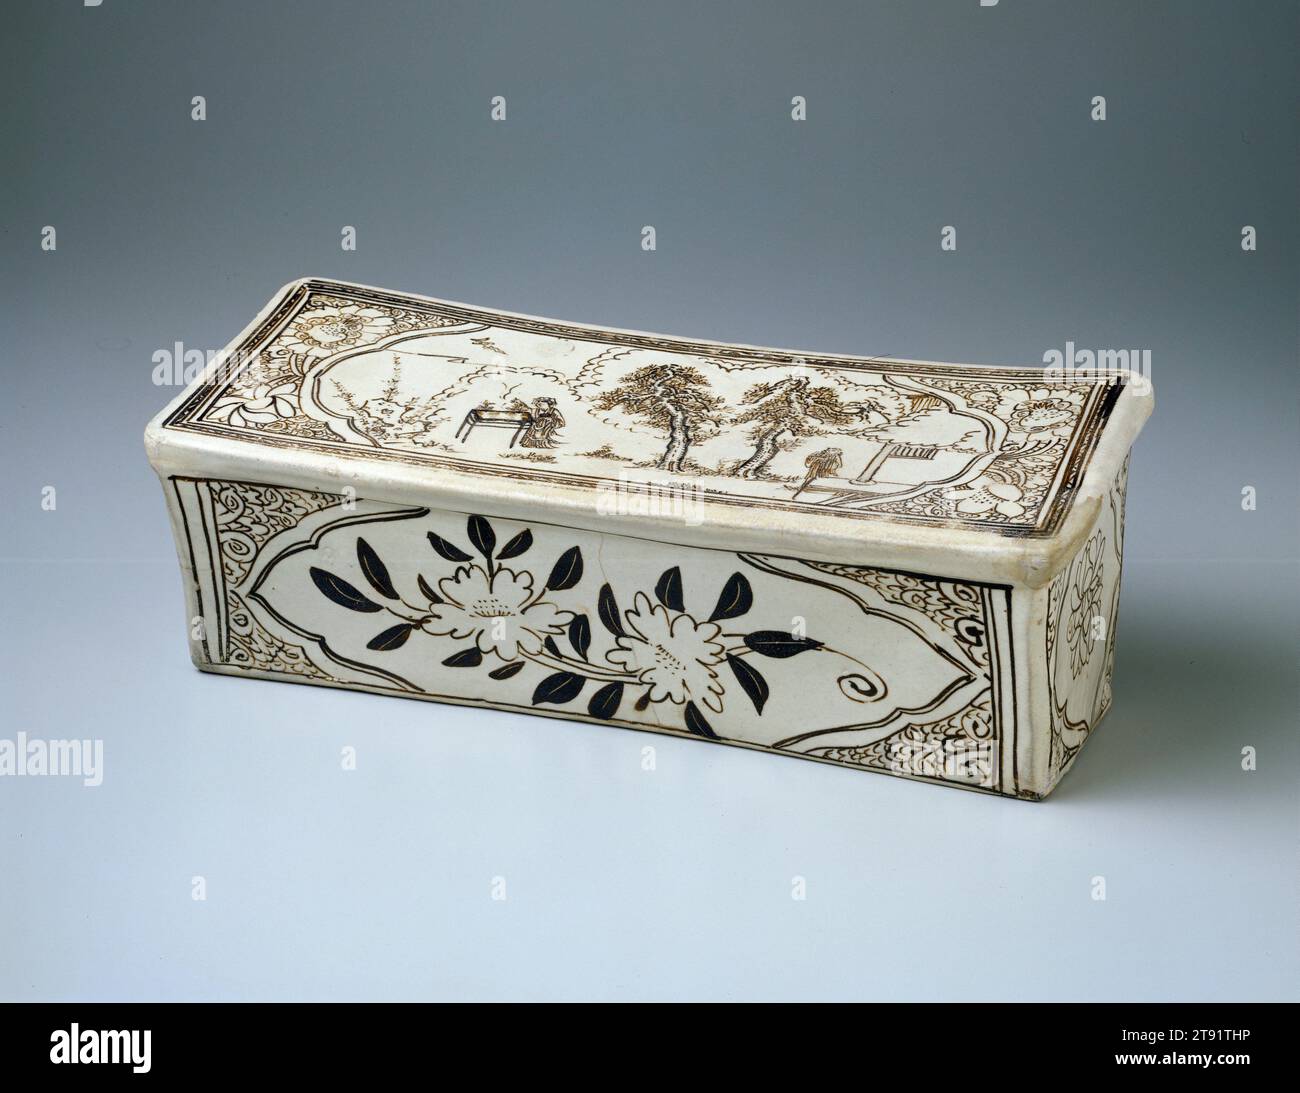 Rectangular Pillow, late 13th-early 14th century, Wang Family Workshop, 6 1/8 x 16 1/4 x 6 3/4 in. (15.56 x 41.28 x 17.15 cm), Tz'u-chou ware Stoneware with iron-brown painted décor on a white slip under transparent glaze, China, 13th-14th century, The Daoist scene depicted on this headrest suggests a ritual performed in honor of Chang'e, the Goddess of the Moon. A well-attired woman is burning incense at a table in a garden. Two tall pines, a tai hu garden rock, bamboo, and a pavilion complete the scene. The front panel encloses a camellia branch with two blossoms Stock Photo